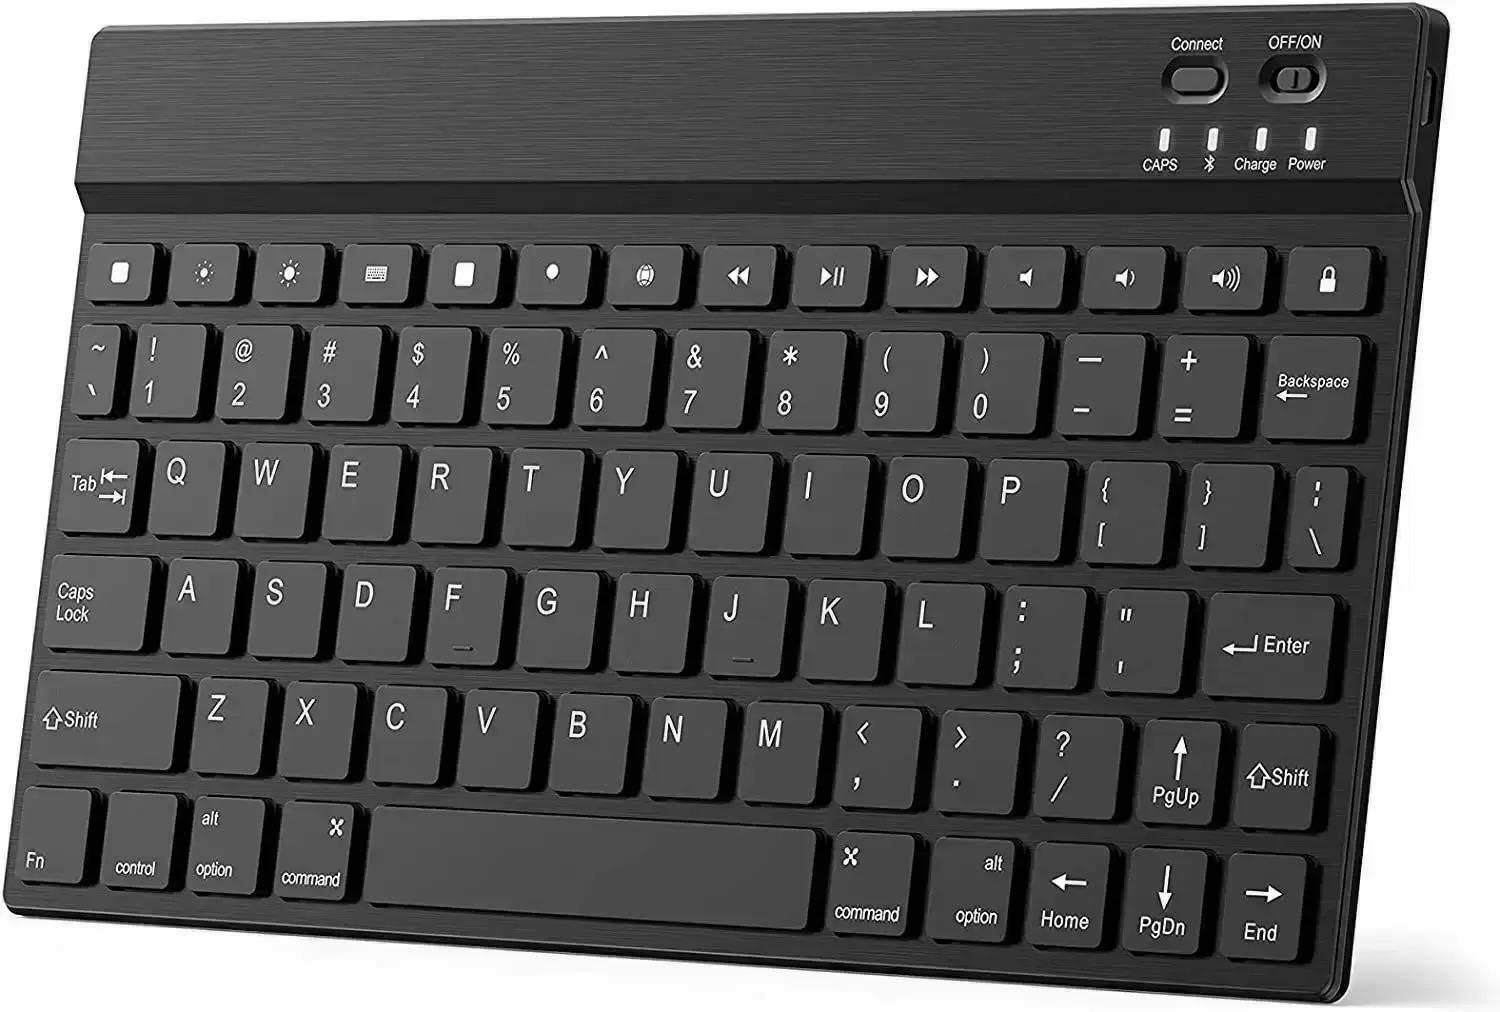 Anker Rechargeable Wireless Keyboard for $8.69